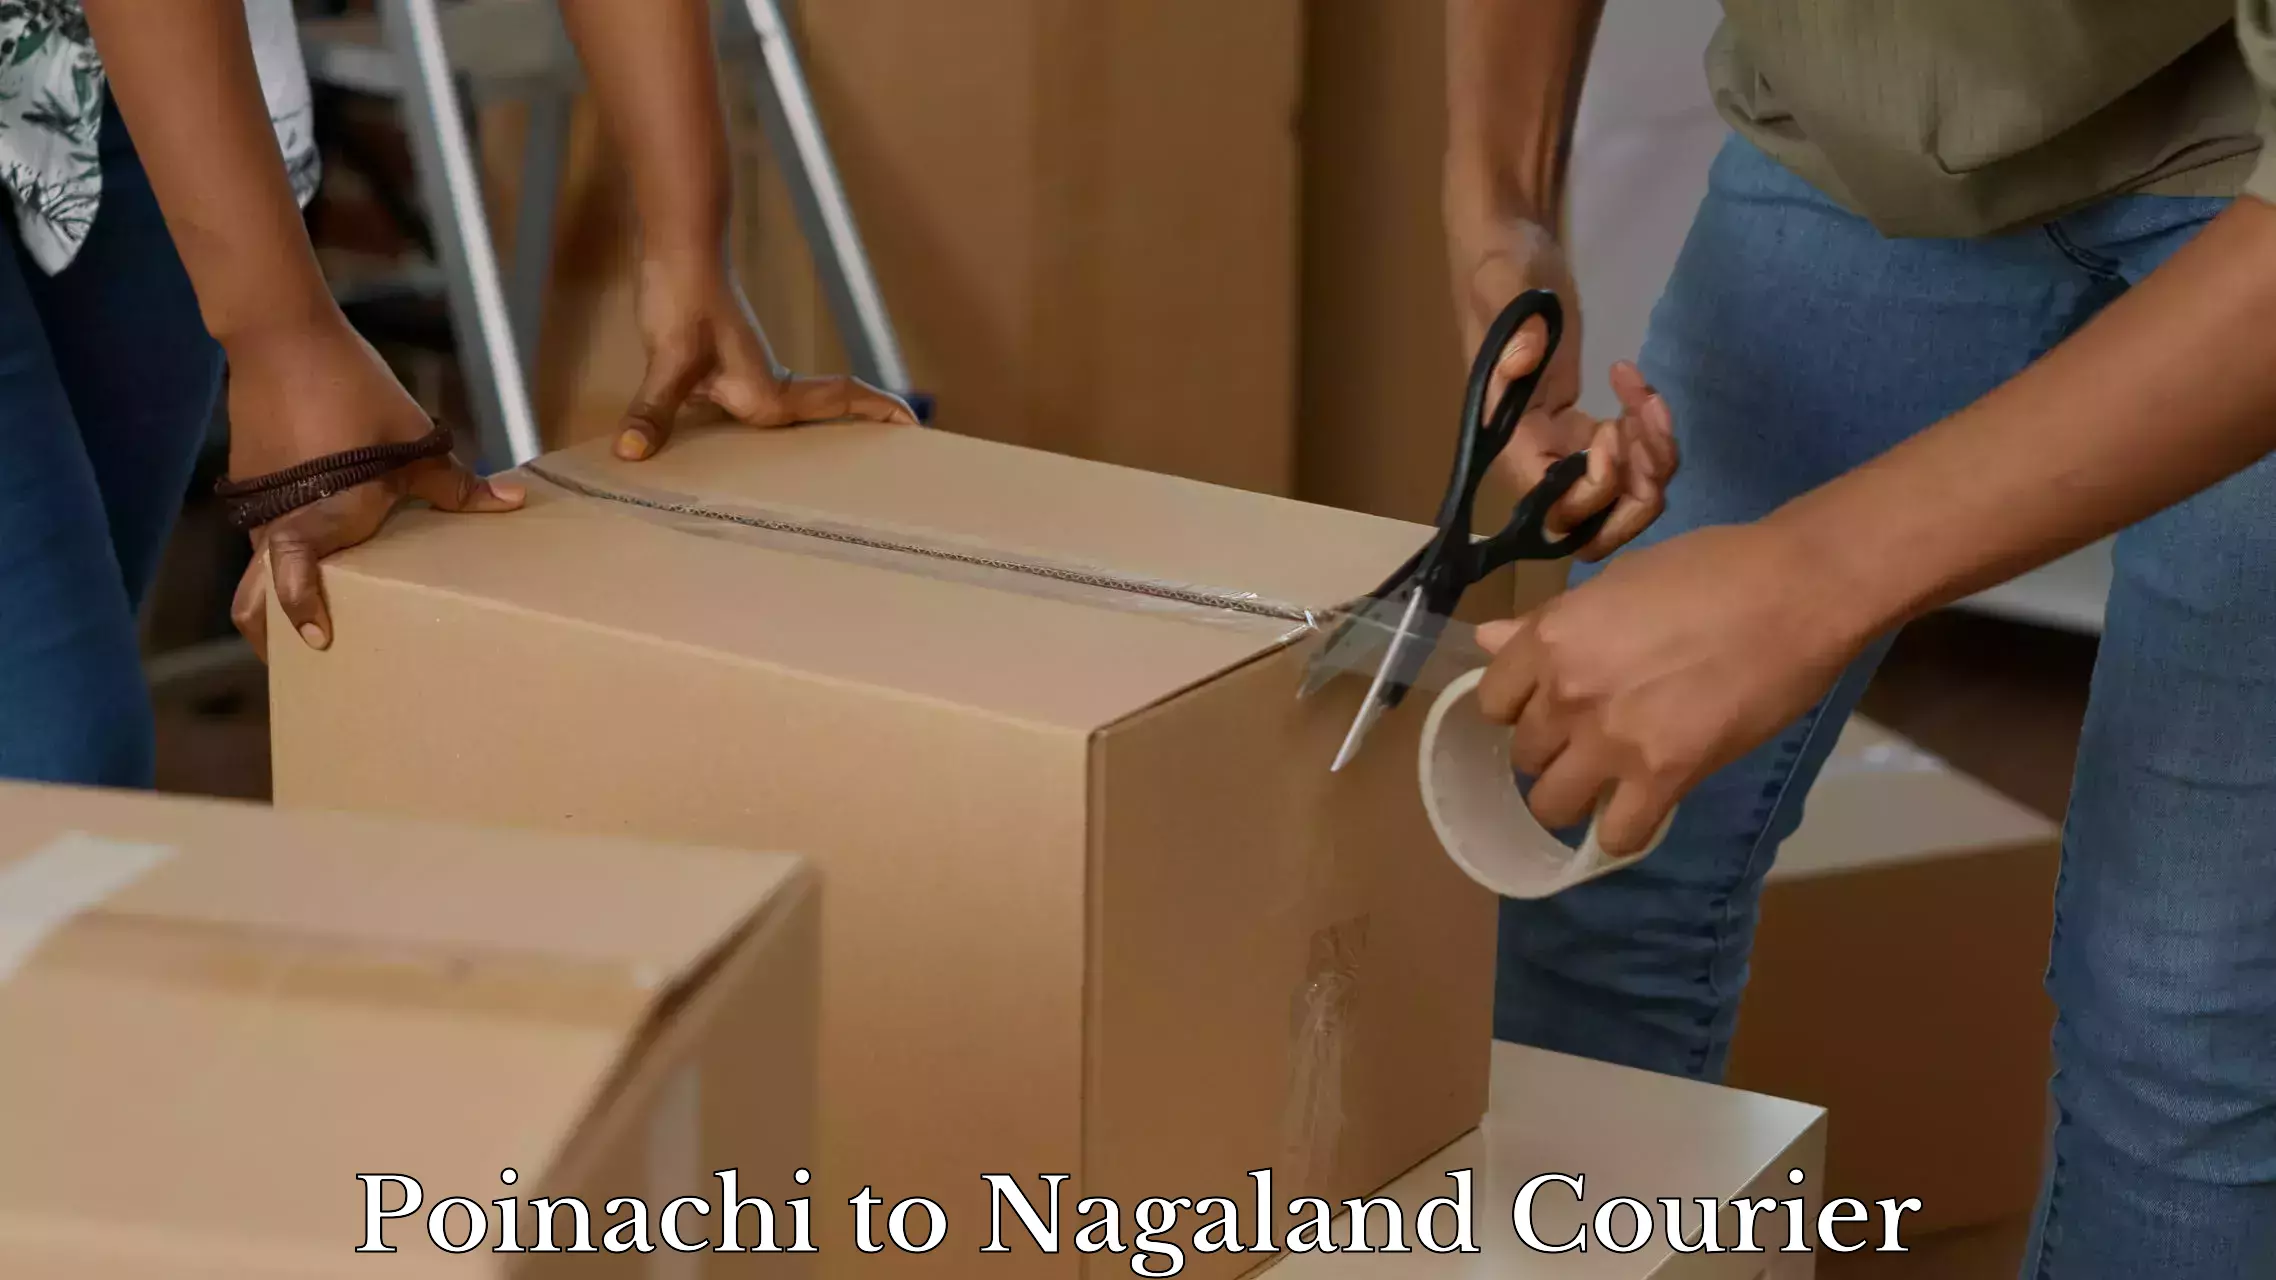 Luggage delivery app Poinachi to Nagaland